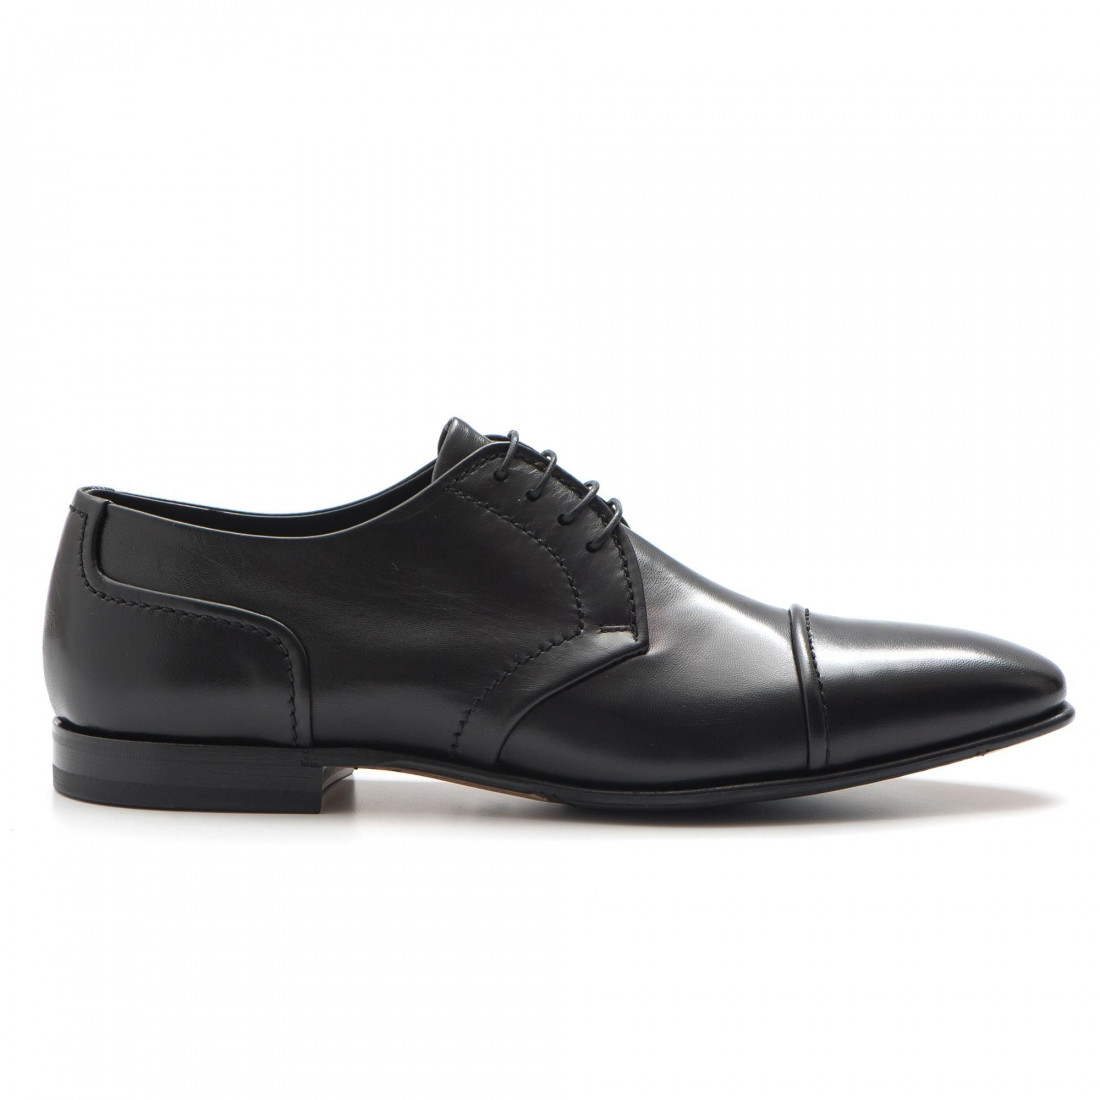 soft black leather shoes